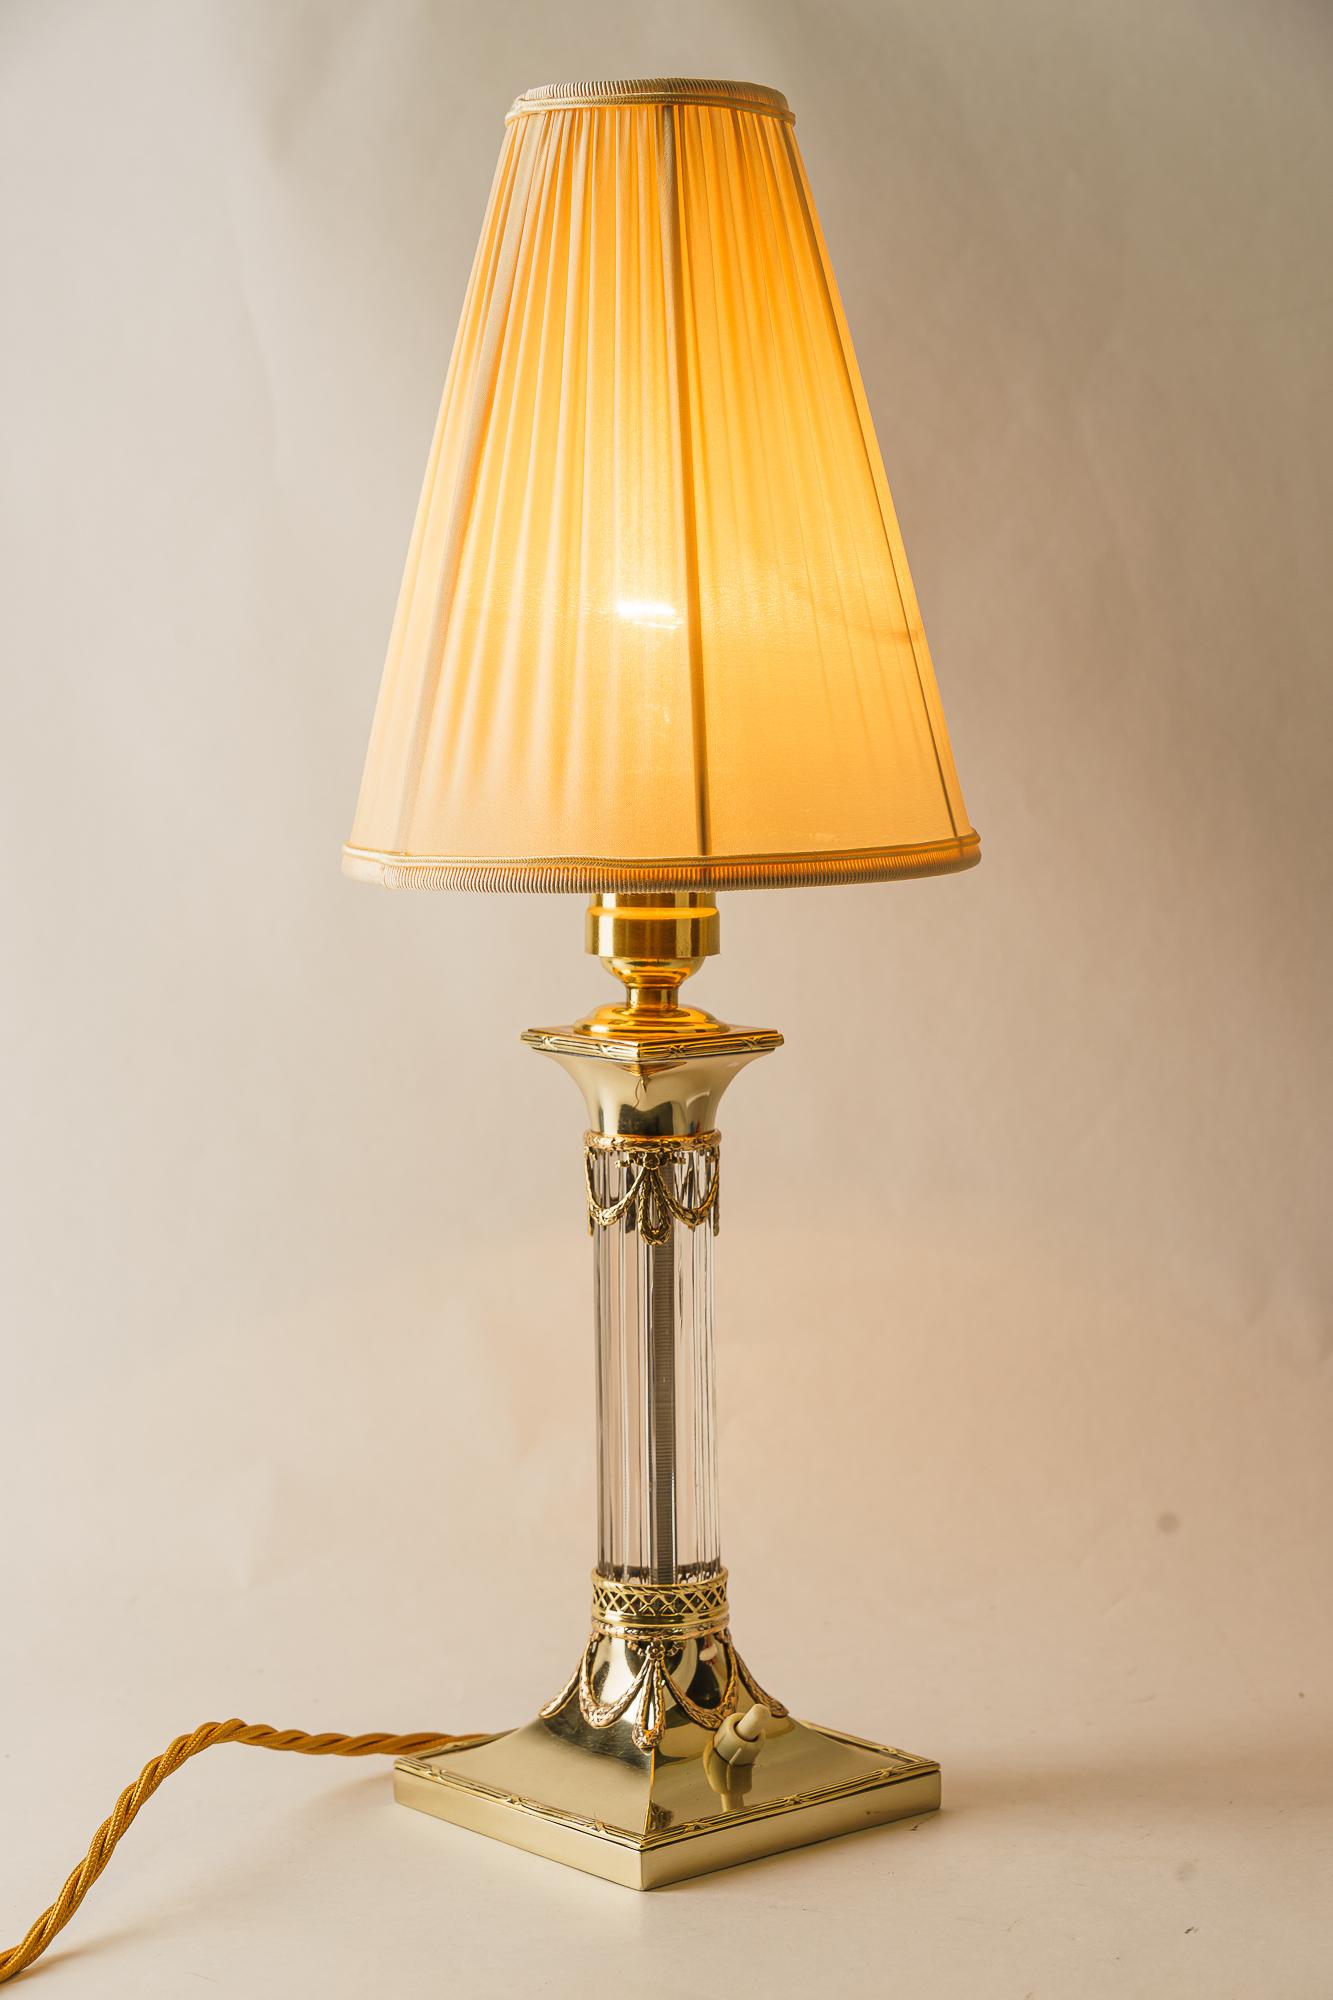 Jugendstil table lamp with fabric shade vienna around 1910 
Brass polished and stove enameled
The fabric shade is replaced ( new )